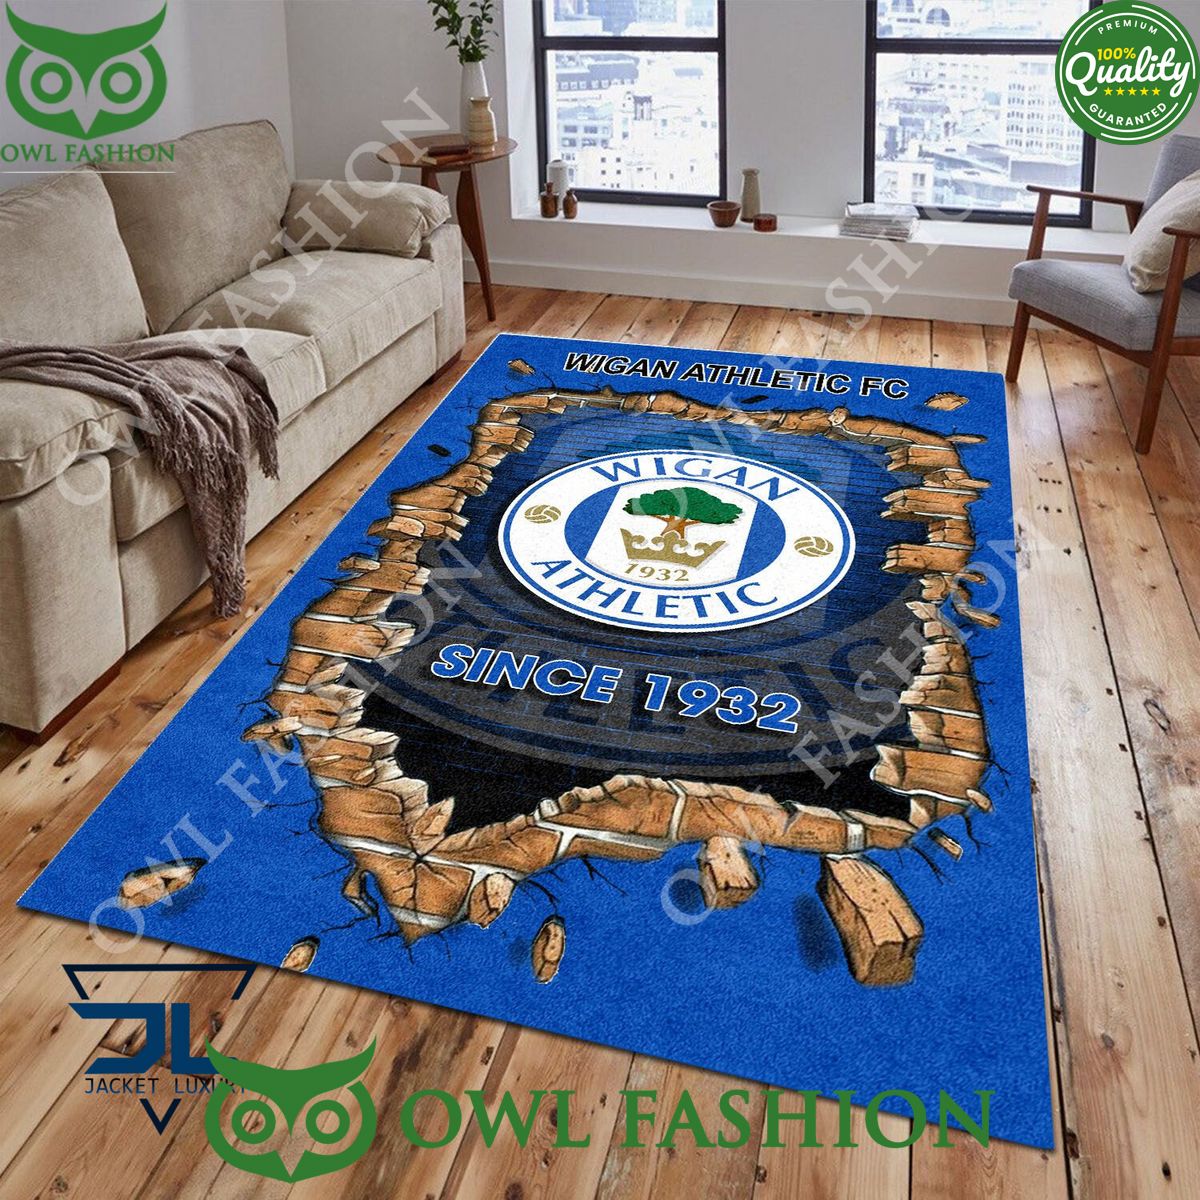 Wigan Athletic 1840 League Two Living Room Rug Carpet Good one dear